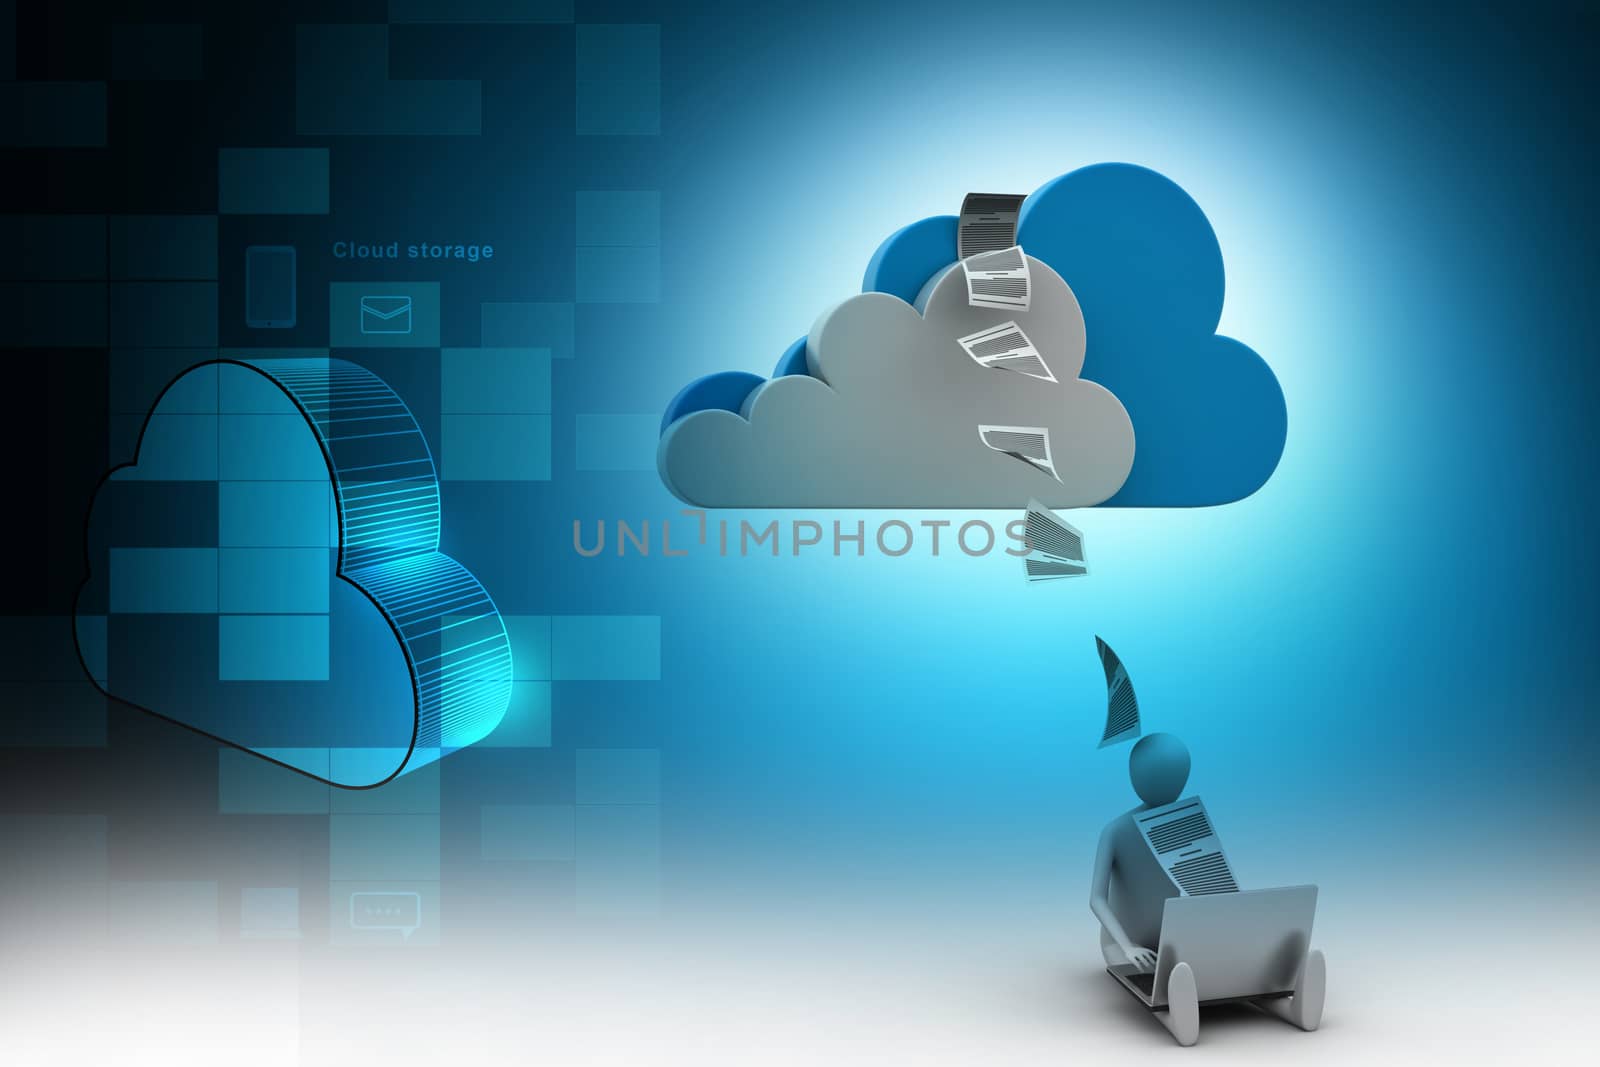 Cloud storage concept by cuteimage